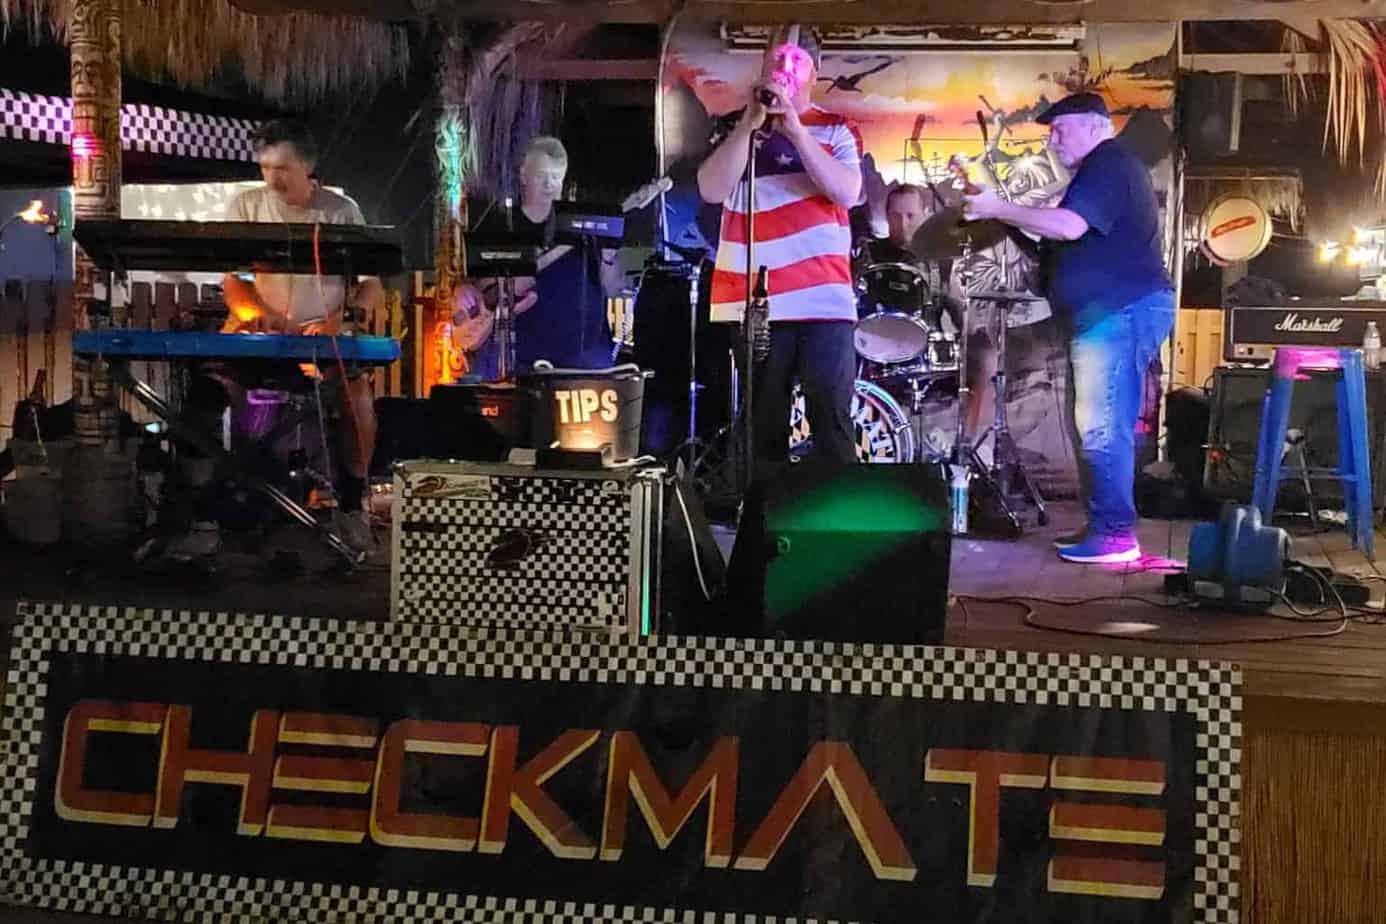 Checkmate at the Square Grouper Ft. Pierce